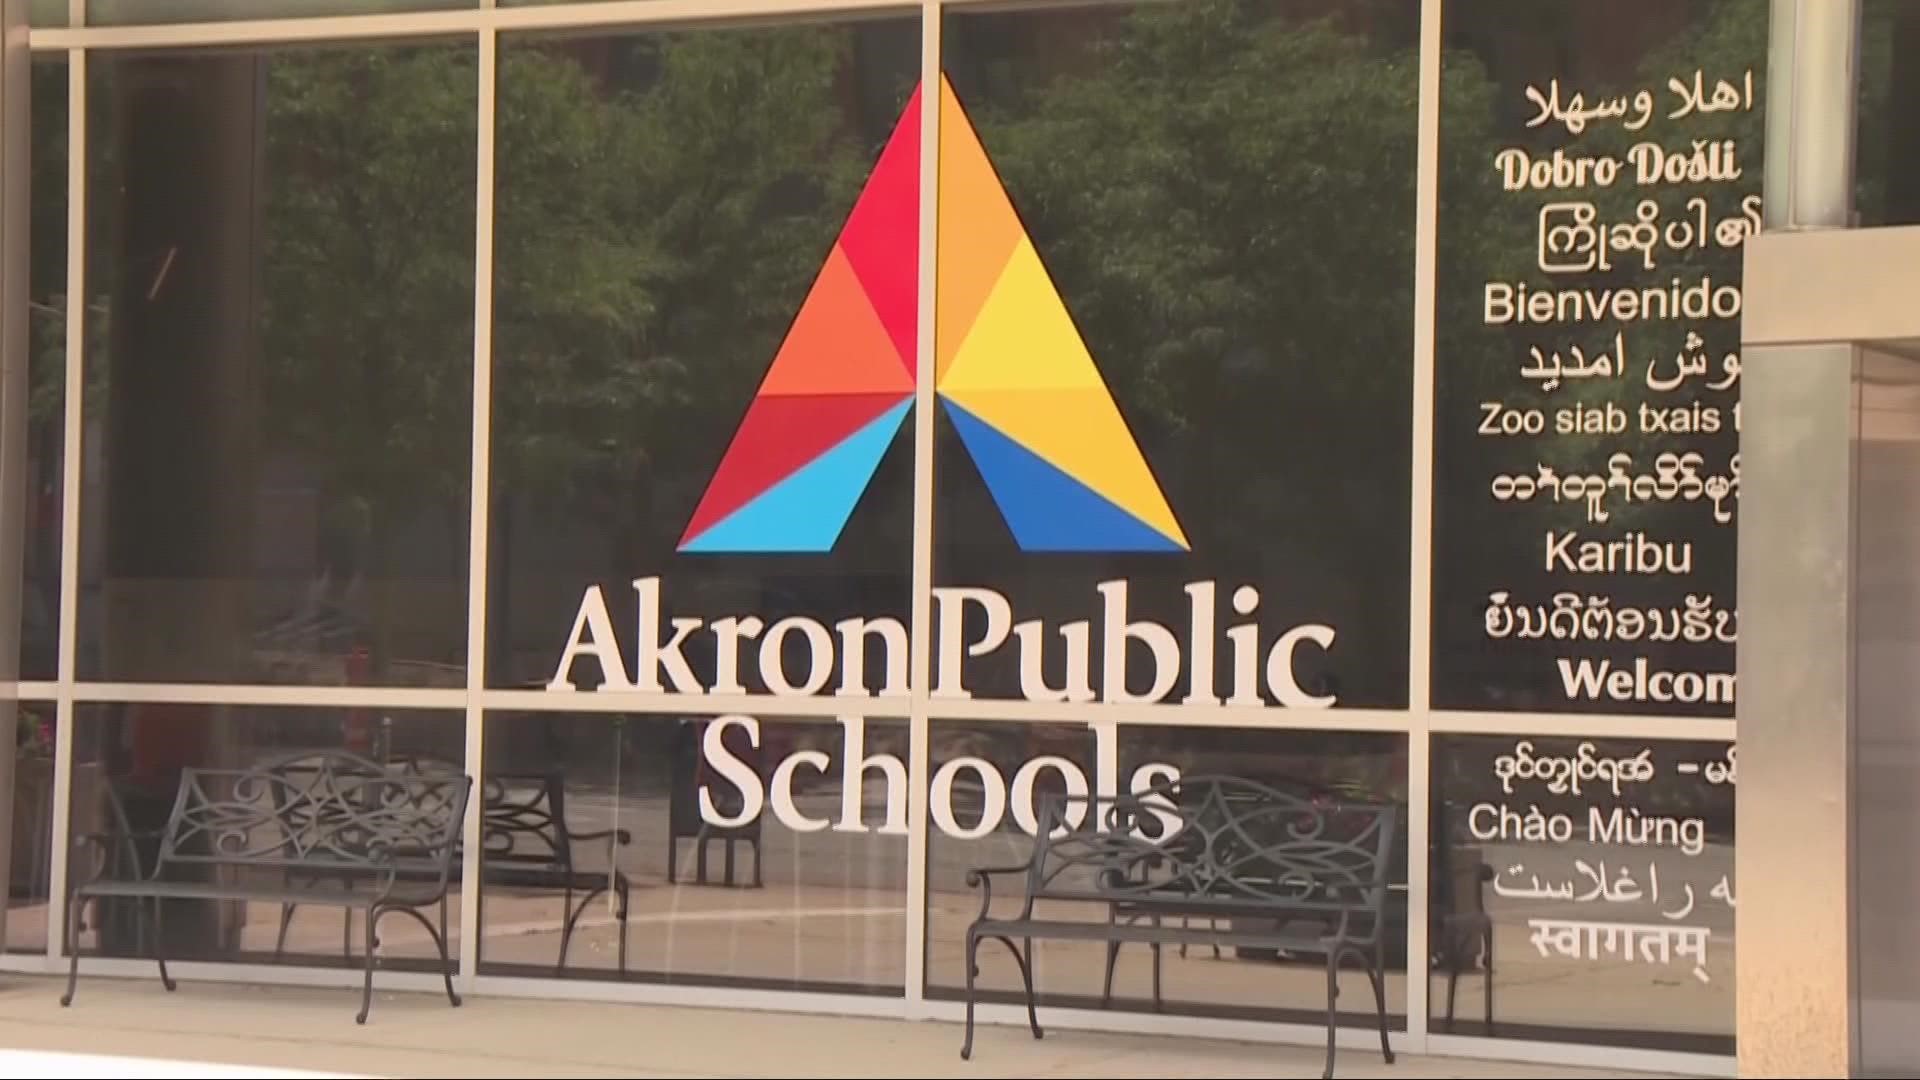 The mediation will predominately surround how to prevent and combat school safety and student behavior, the Akron Education Association's president said.